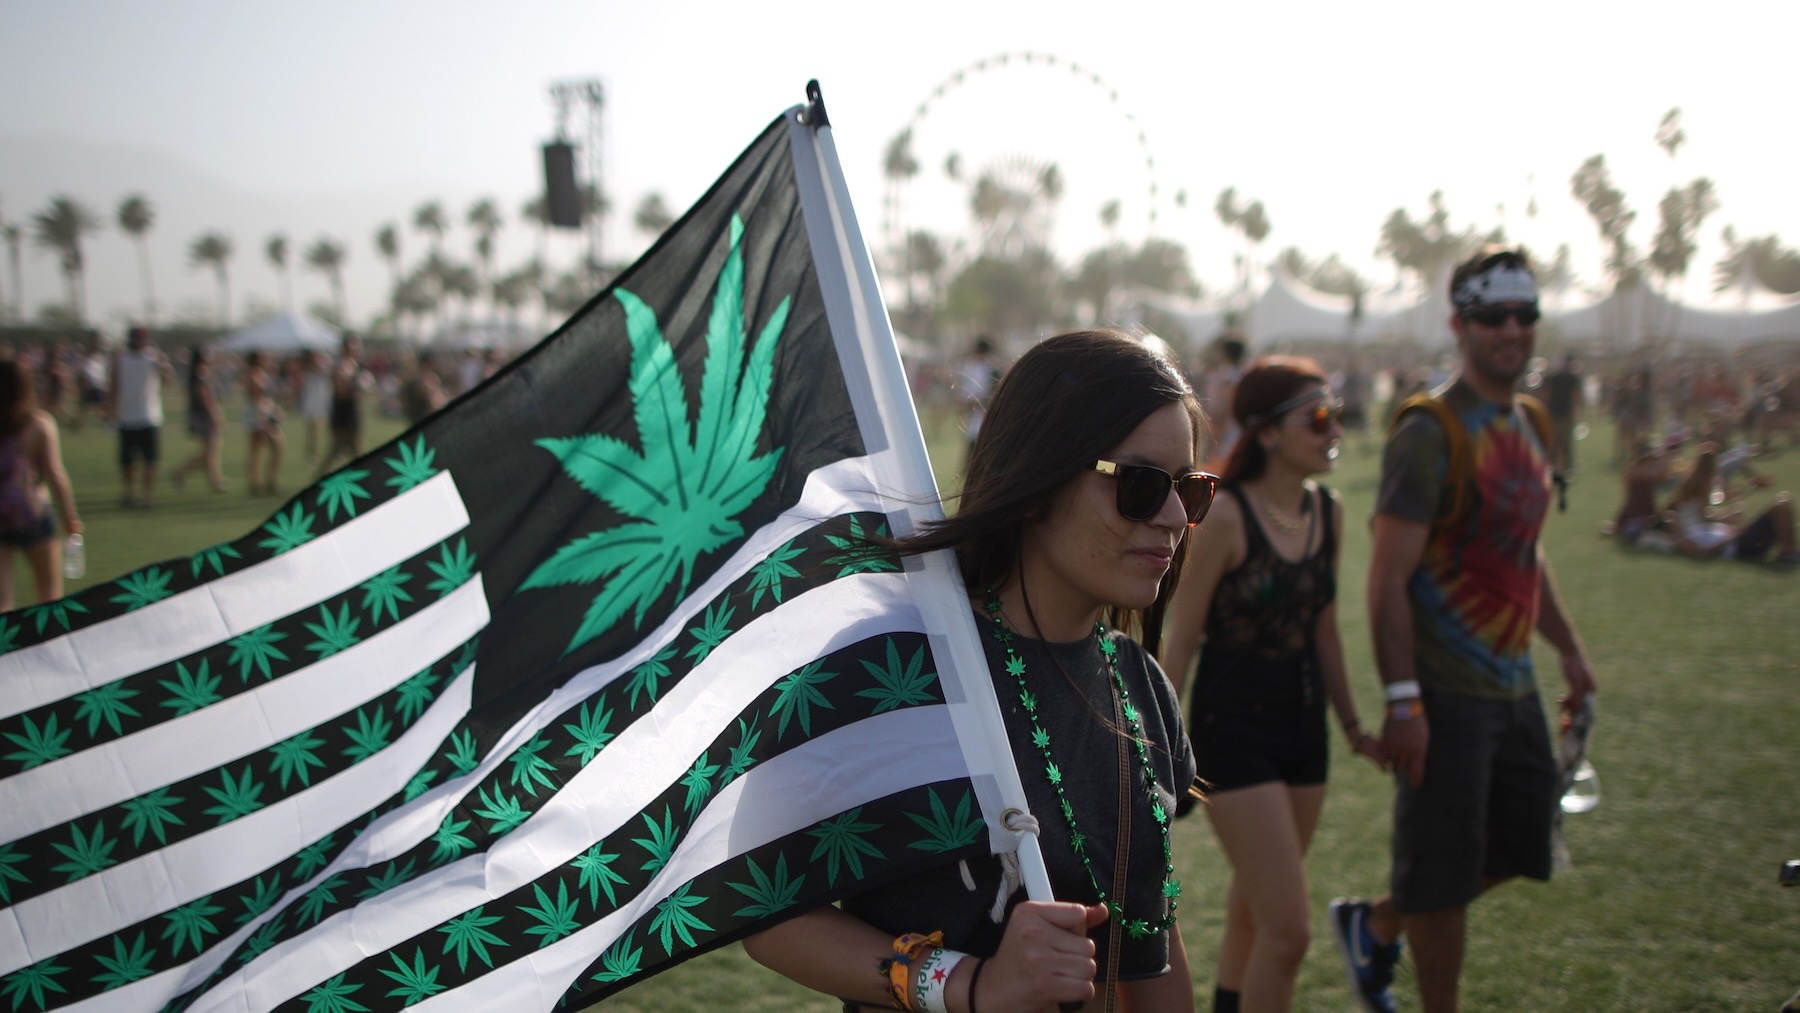 84% of 2024 Festival Attendees Plan to Take Drugs